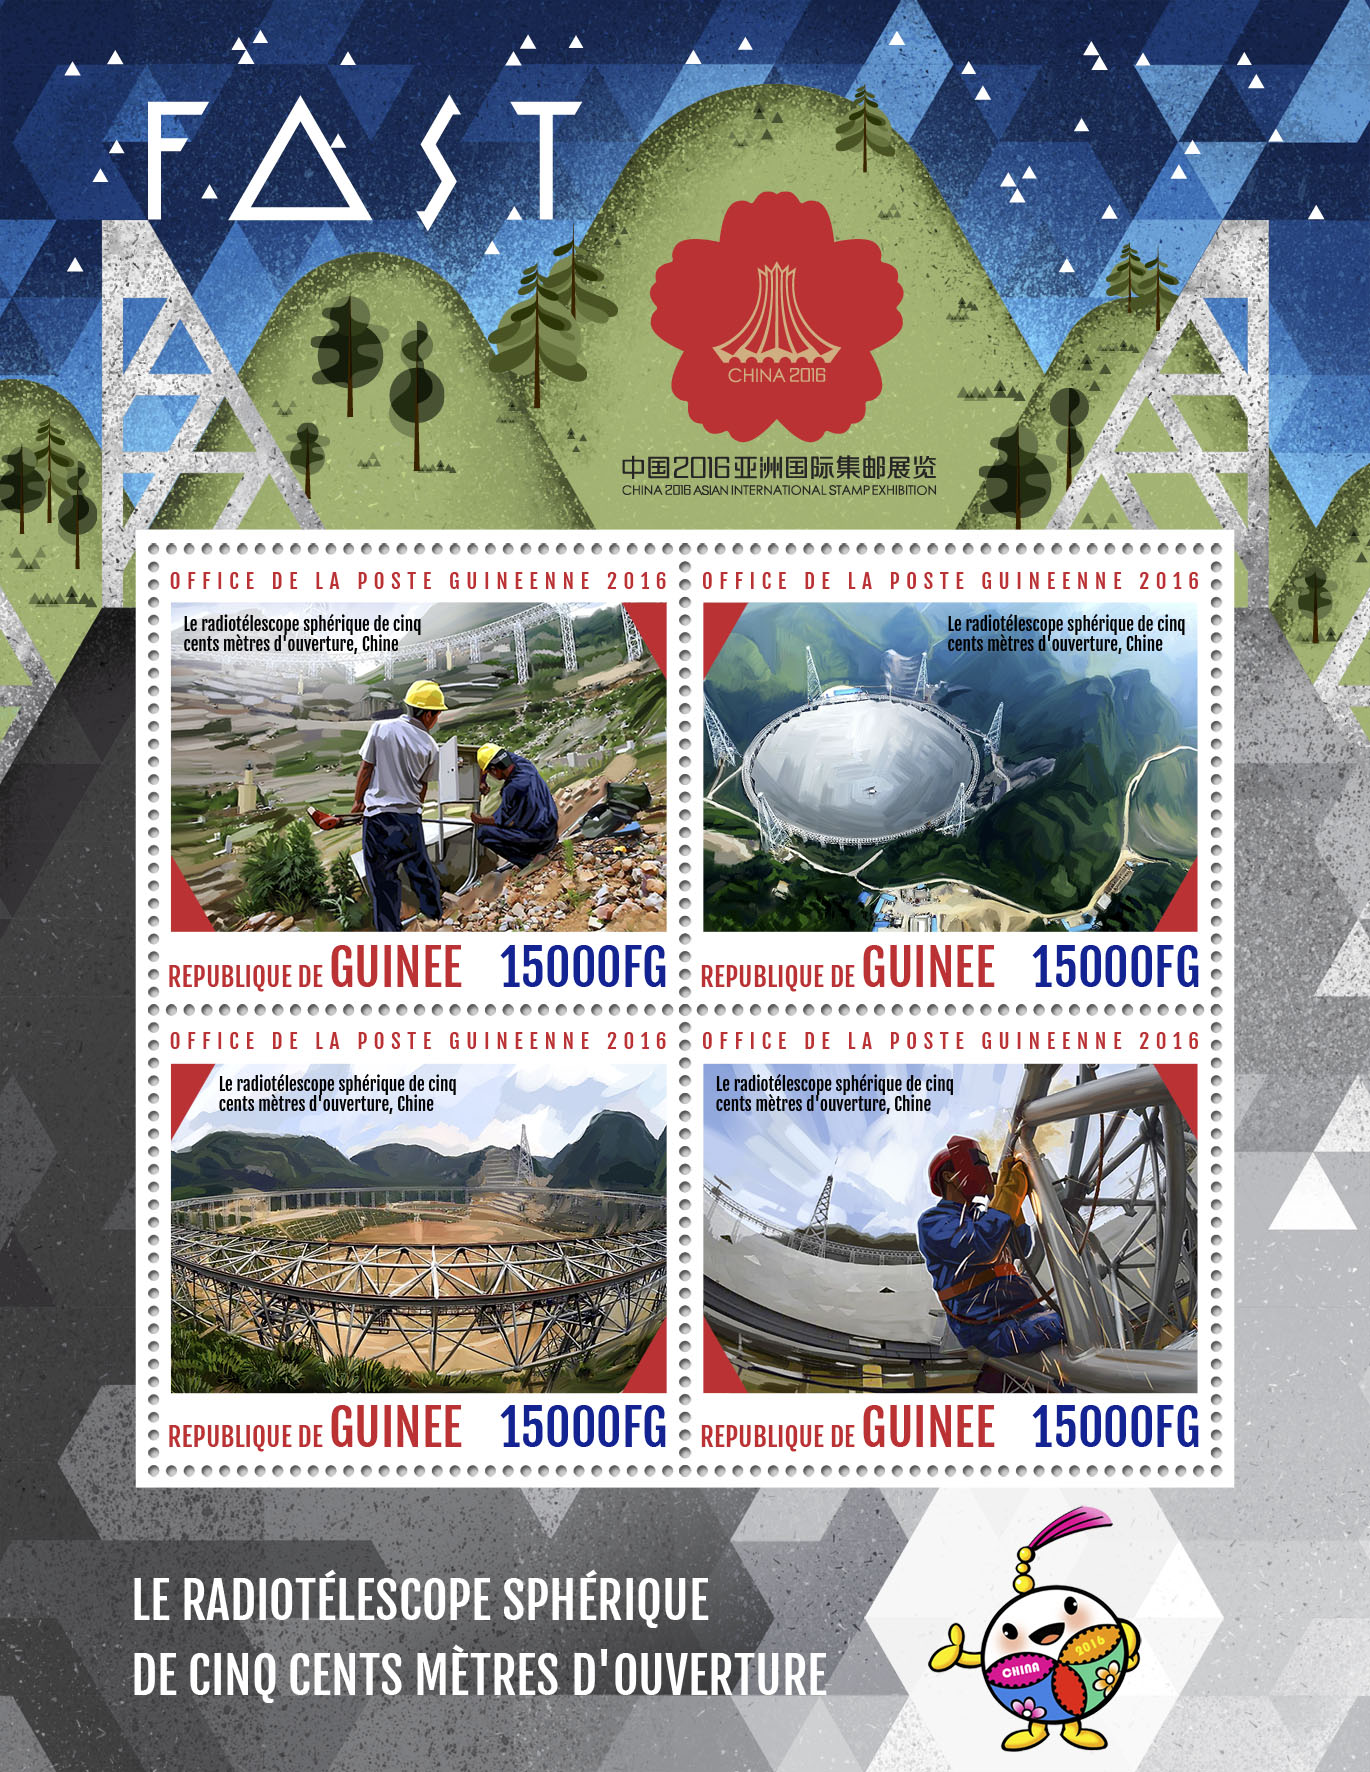 Radio Telescope  - Issue of Guinée postage stamps